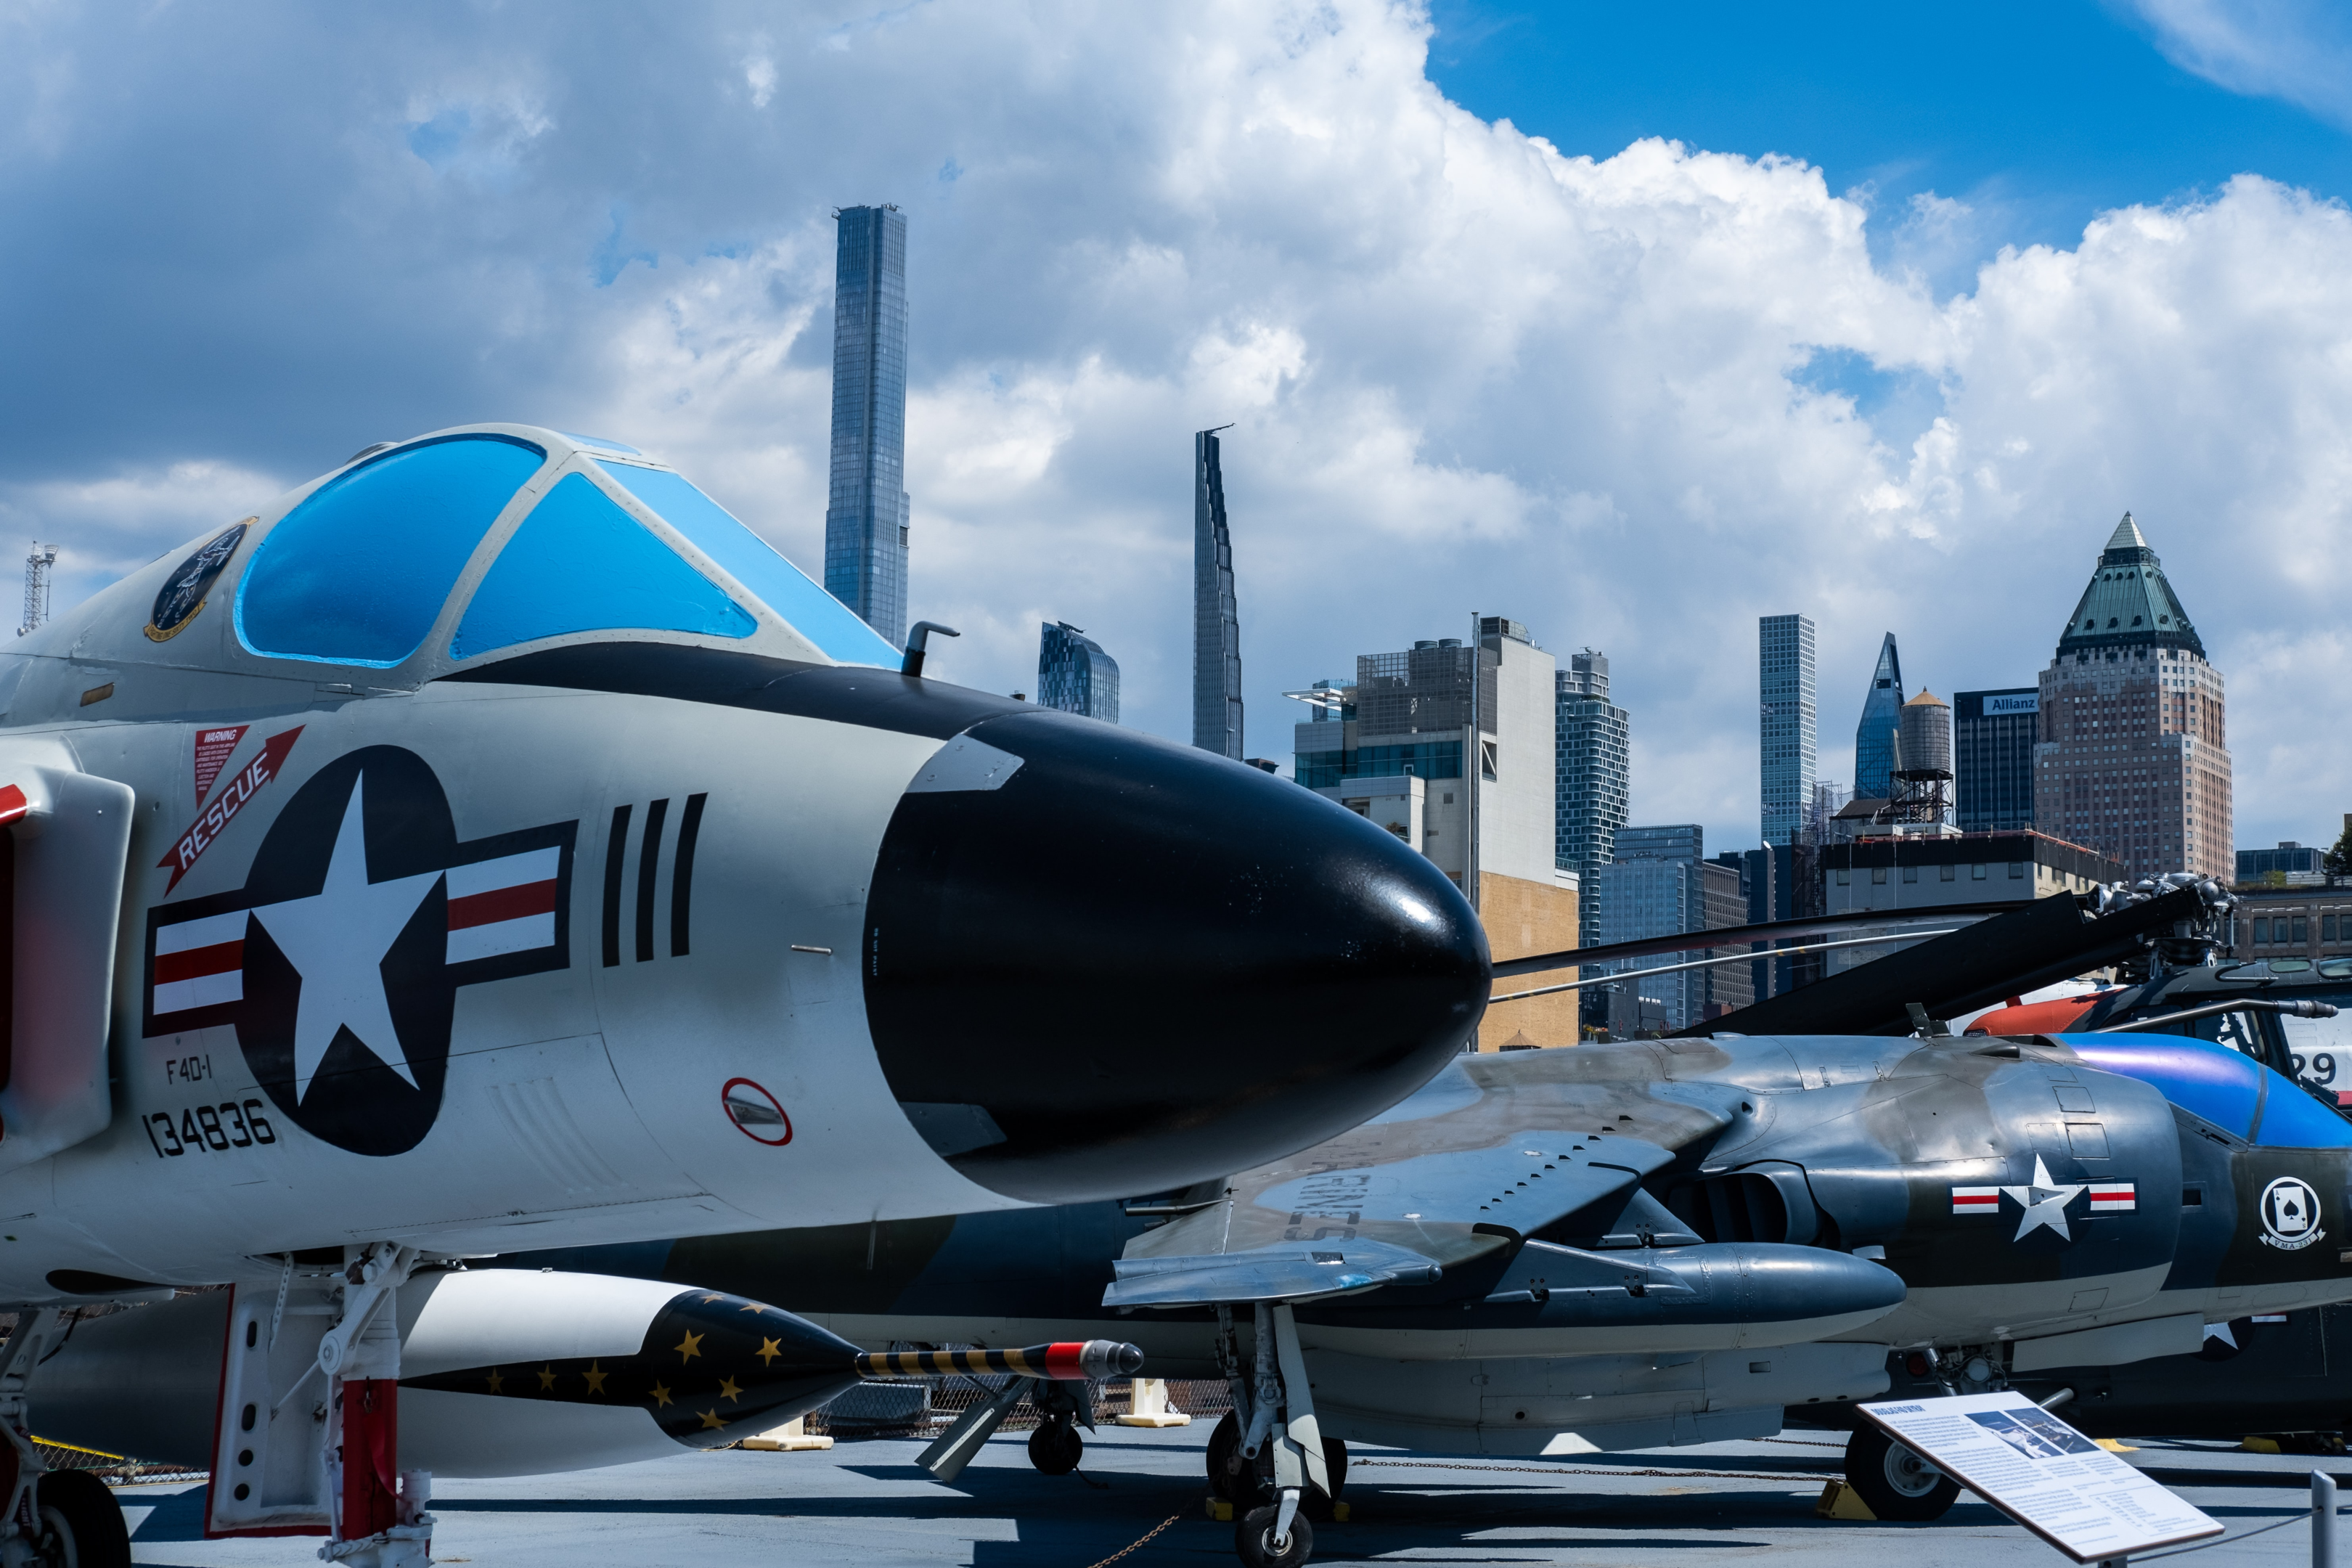 Vintage aircrafts at the Intrepid Sea, Air & Space Museum in New York City